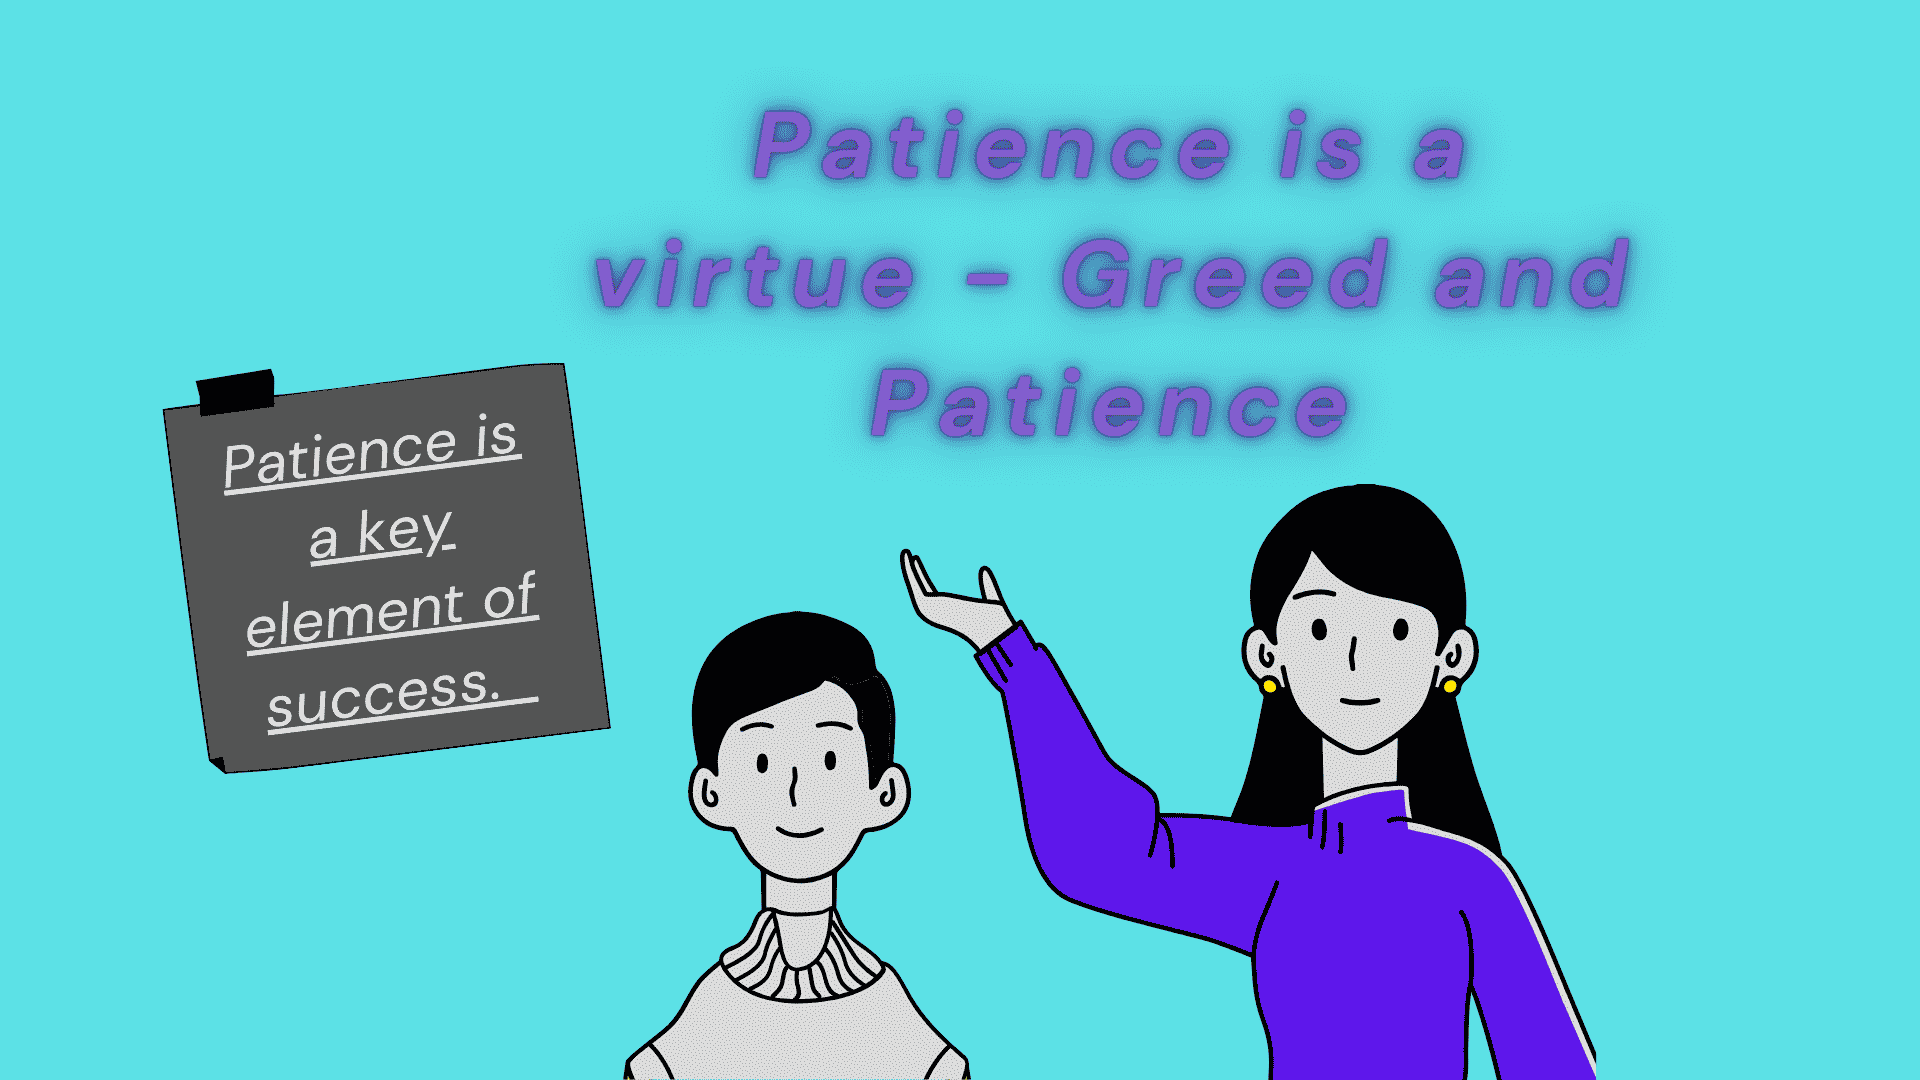 Patience is a virtue - Greed and Patience